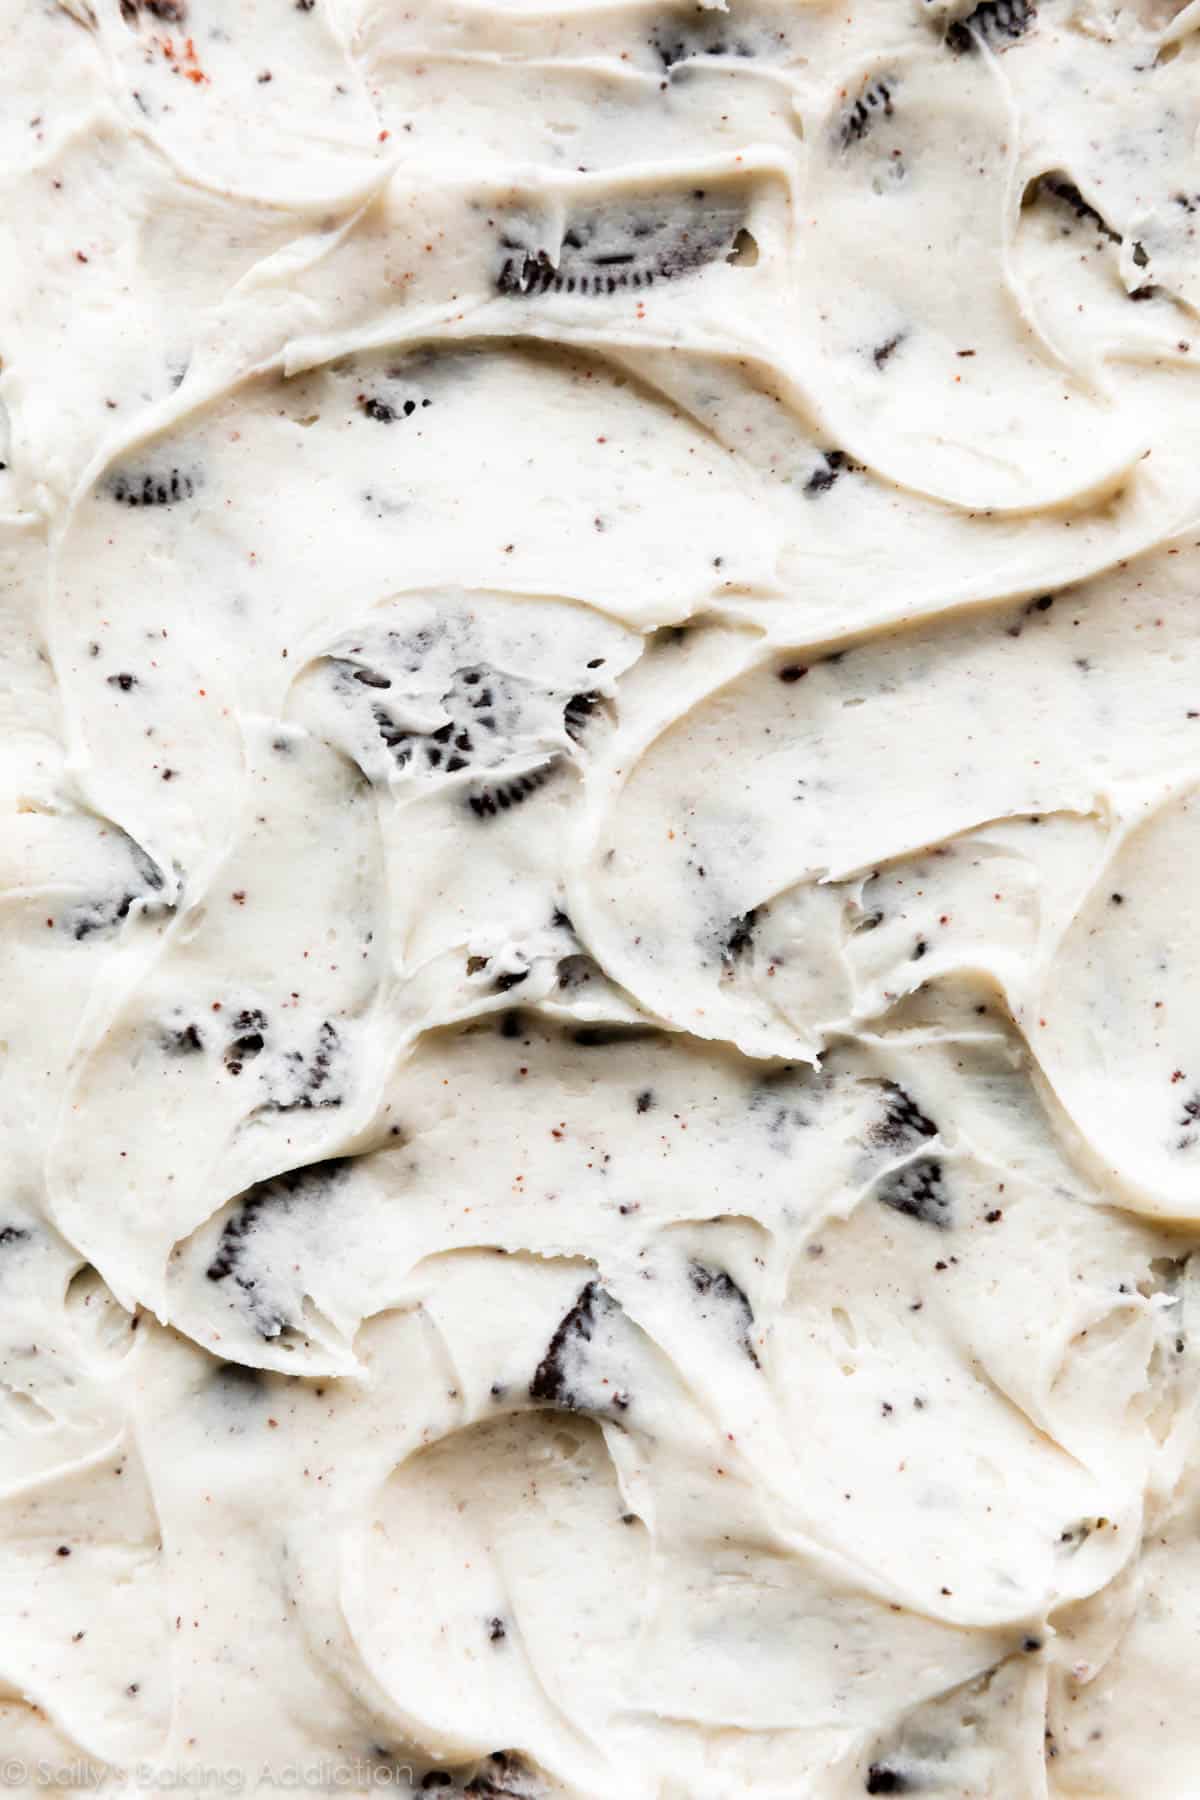 Cookies and cream Oreo buttercream frosting